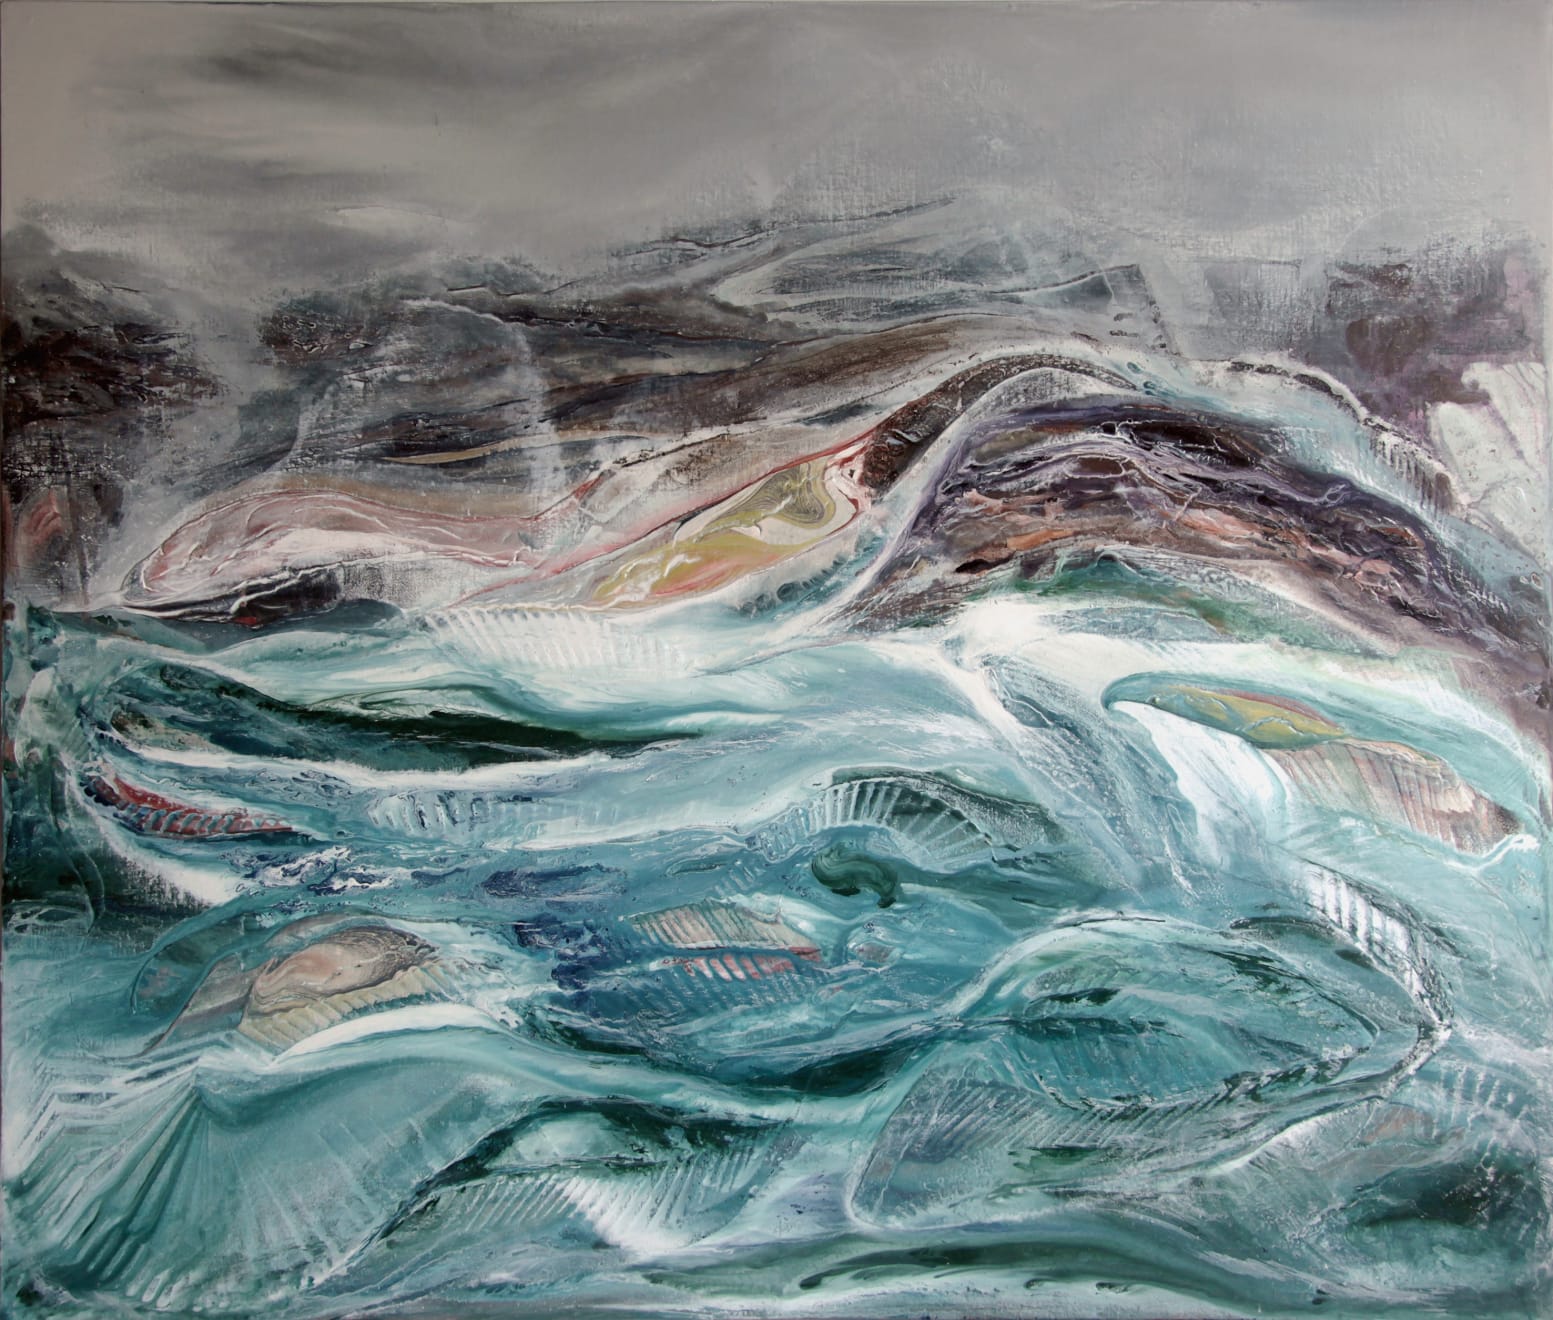 Undercurrent Oil and Acrylic on Linen Mounted Board 200 x 170cm AUD $13 500 SOLD